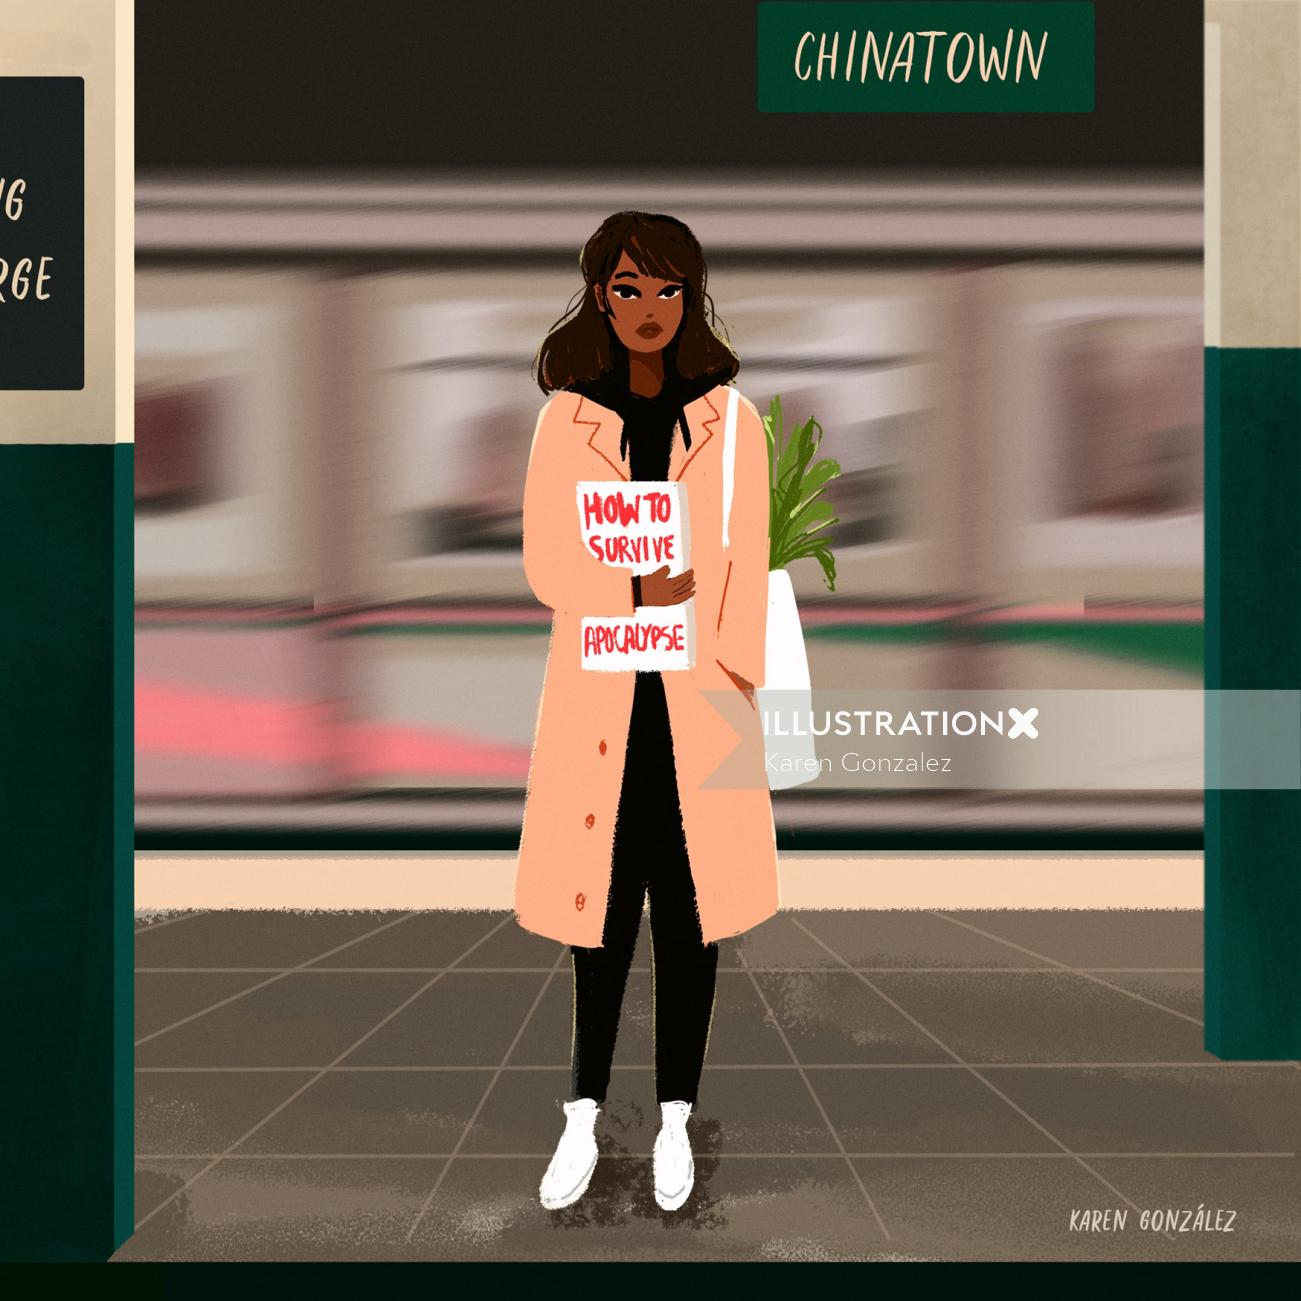 Gif animation of girl at Train Station